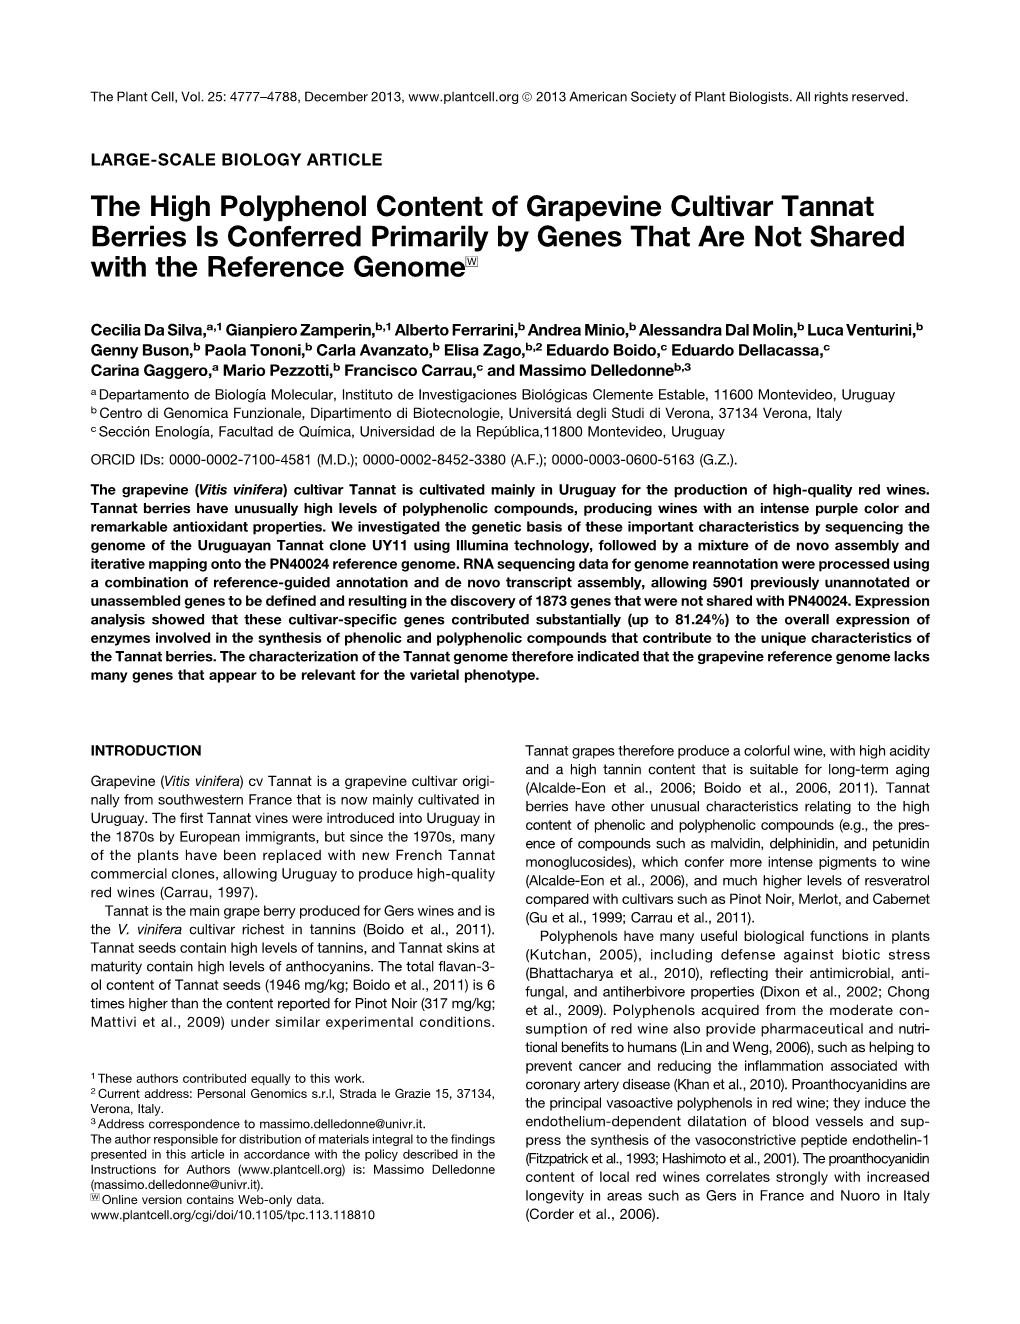 The High Polyphenol Content of Grapevine Cultivar Tannat Berries Is Conferred Primarily by Genes That Are Not Shared with the Reference Genome W